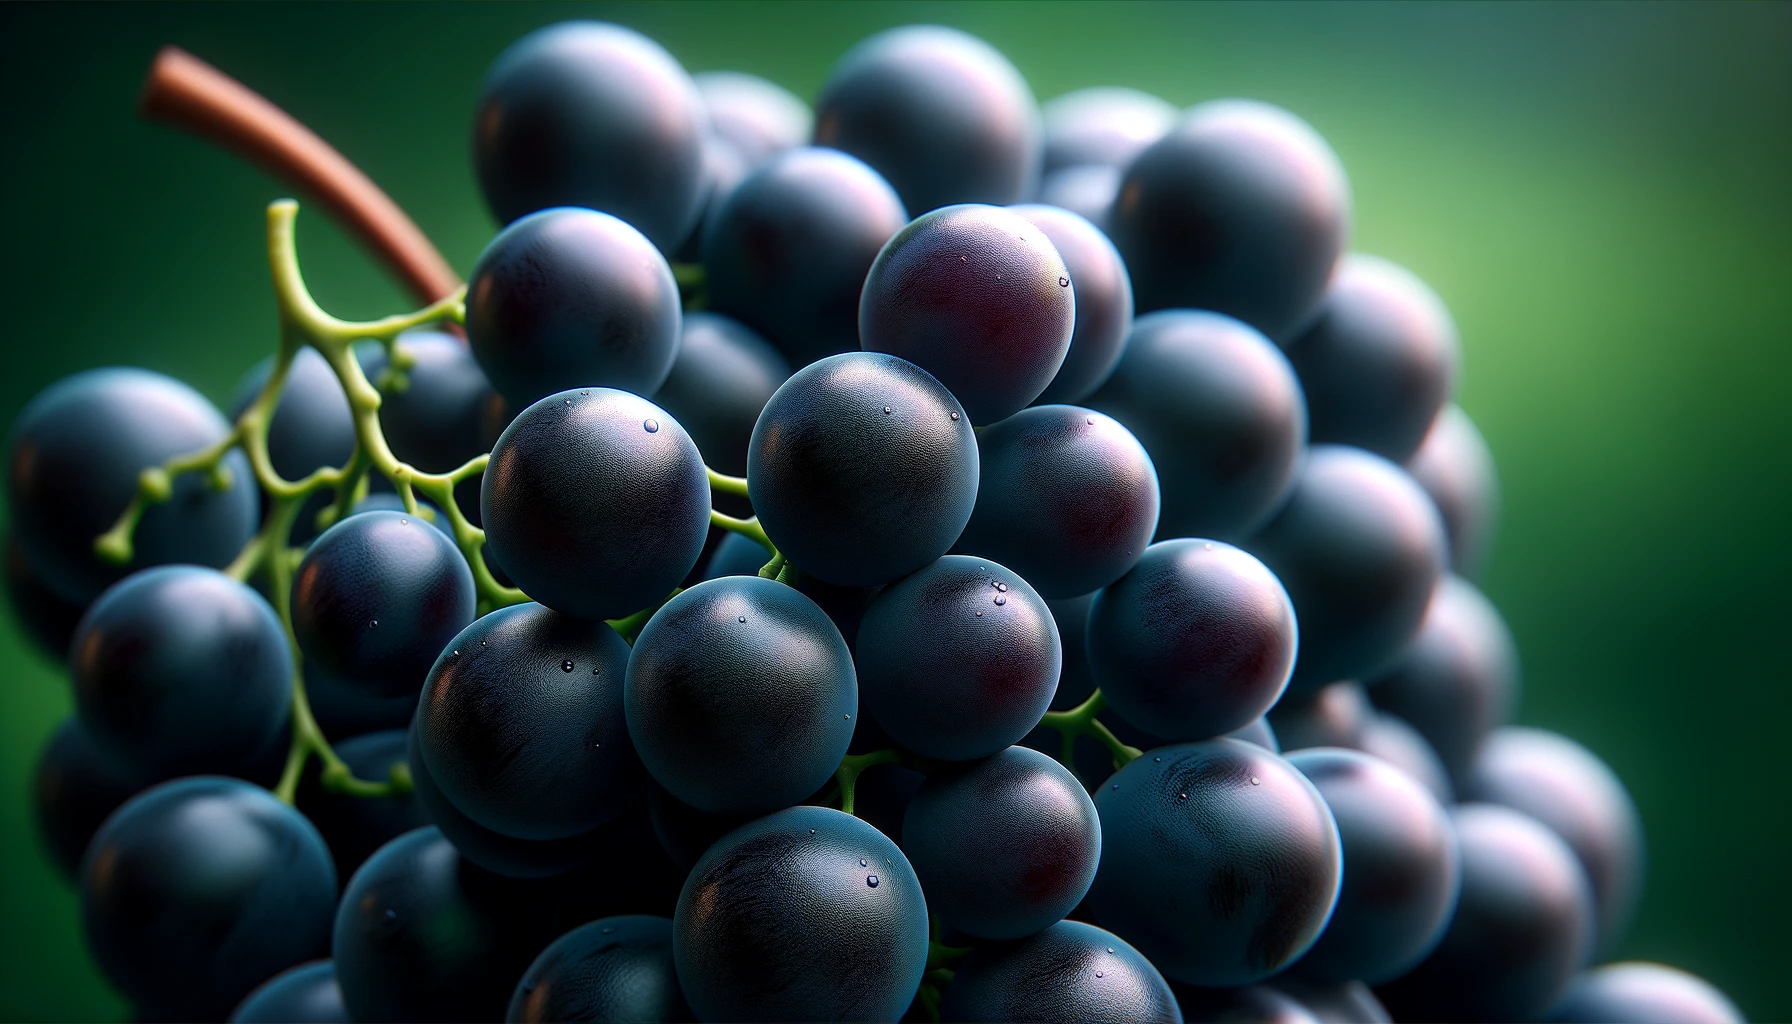 DALL·E 2024-05-23 10.47.34 - Photorealistic stock image of Black Spanish (Lenoir) grapes, closely focused on a cluster of ripe Black Spanish grapes with deep, dark purple to black